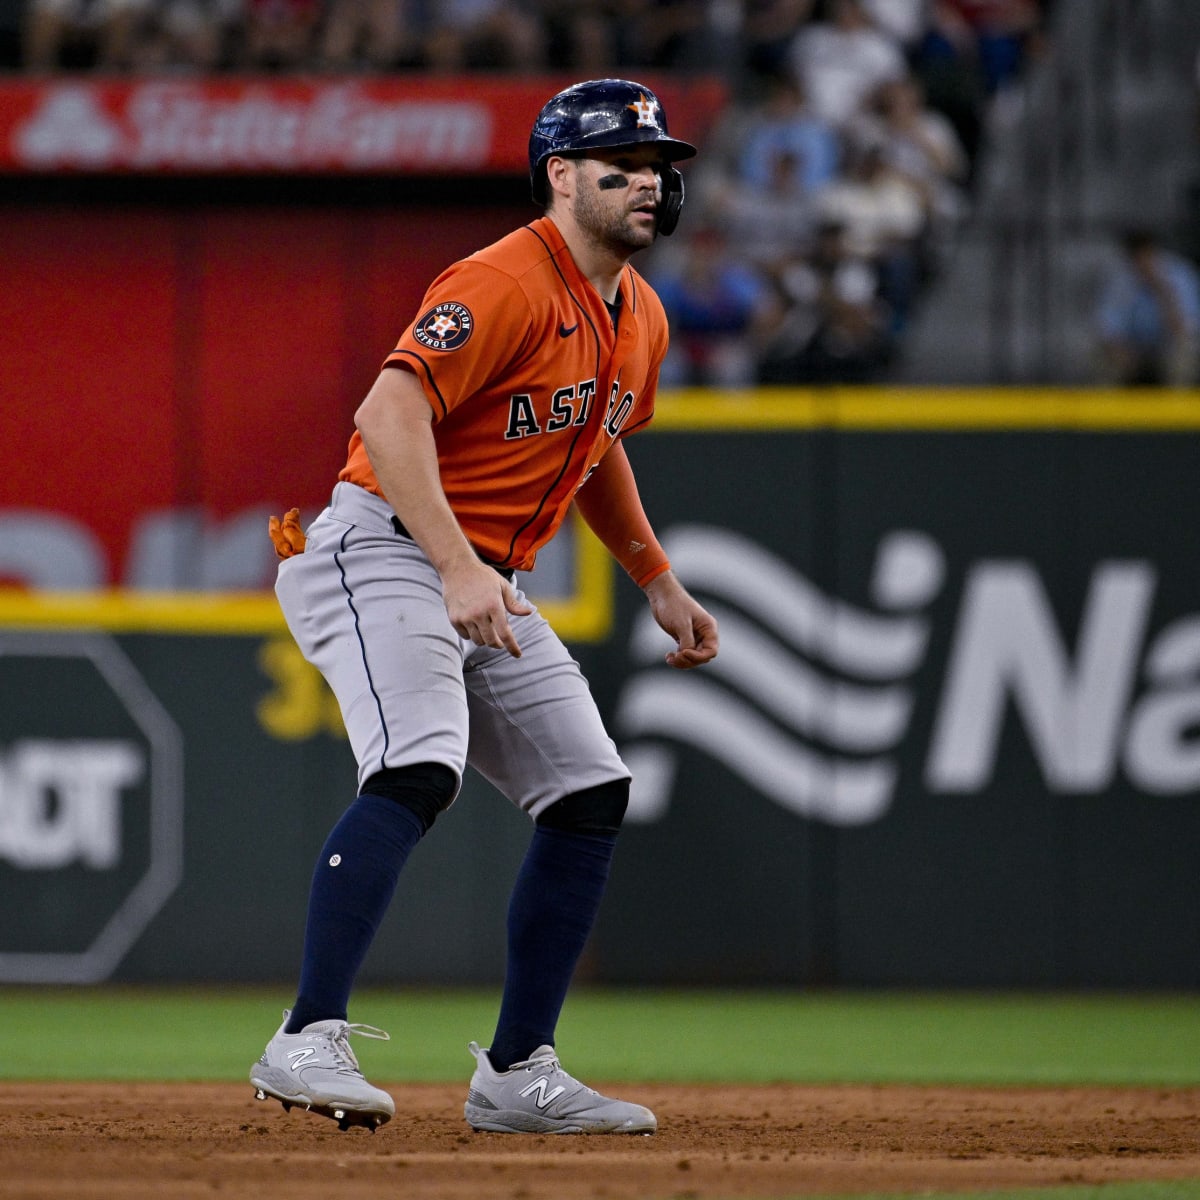 Seattle Mariners Fans Upset Over Cheap Play By Houston Astros